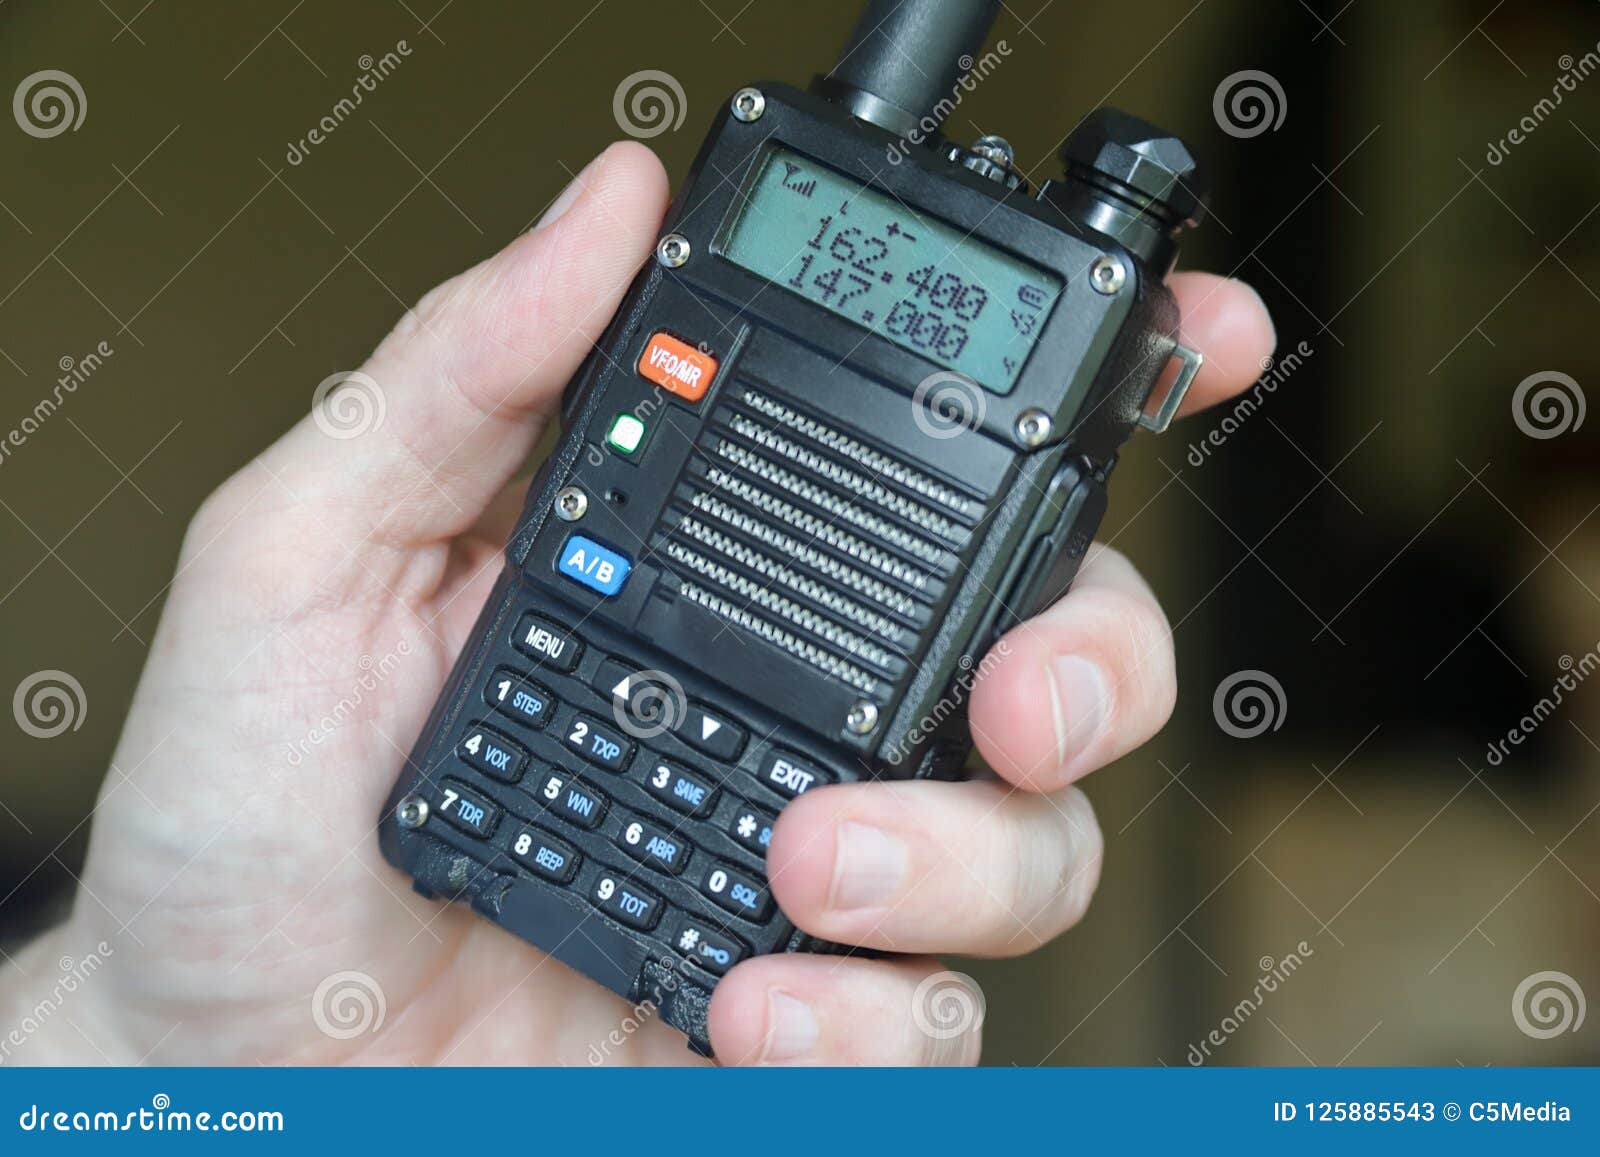 Can Amateur Radio Be Used as a Walkie-Talkie